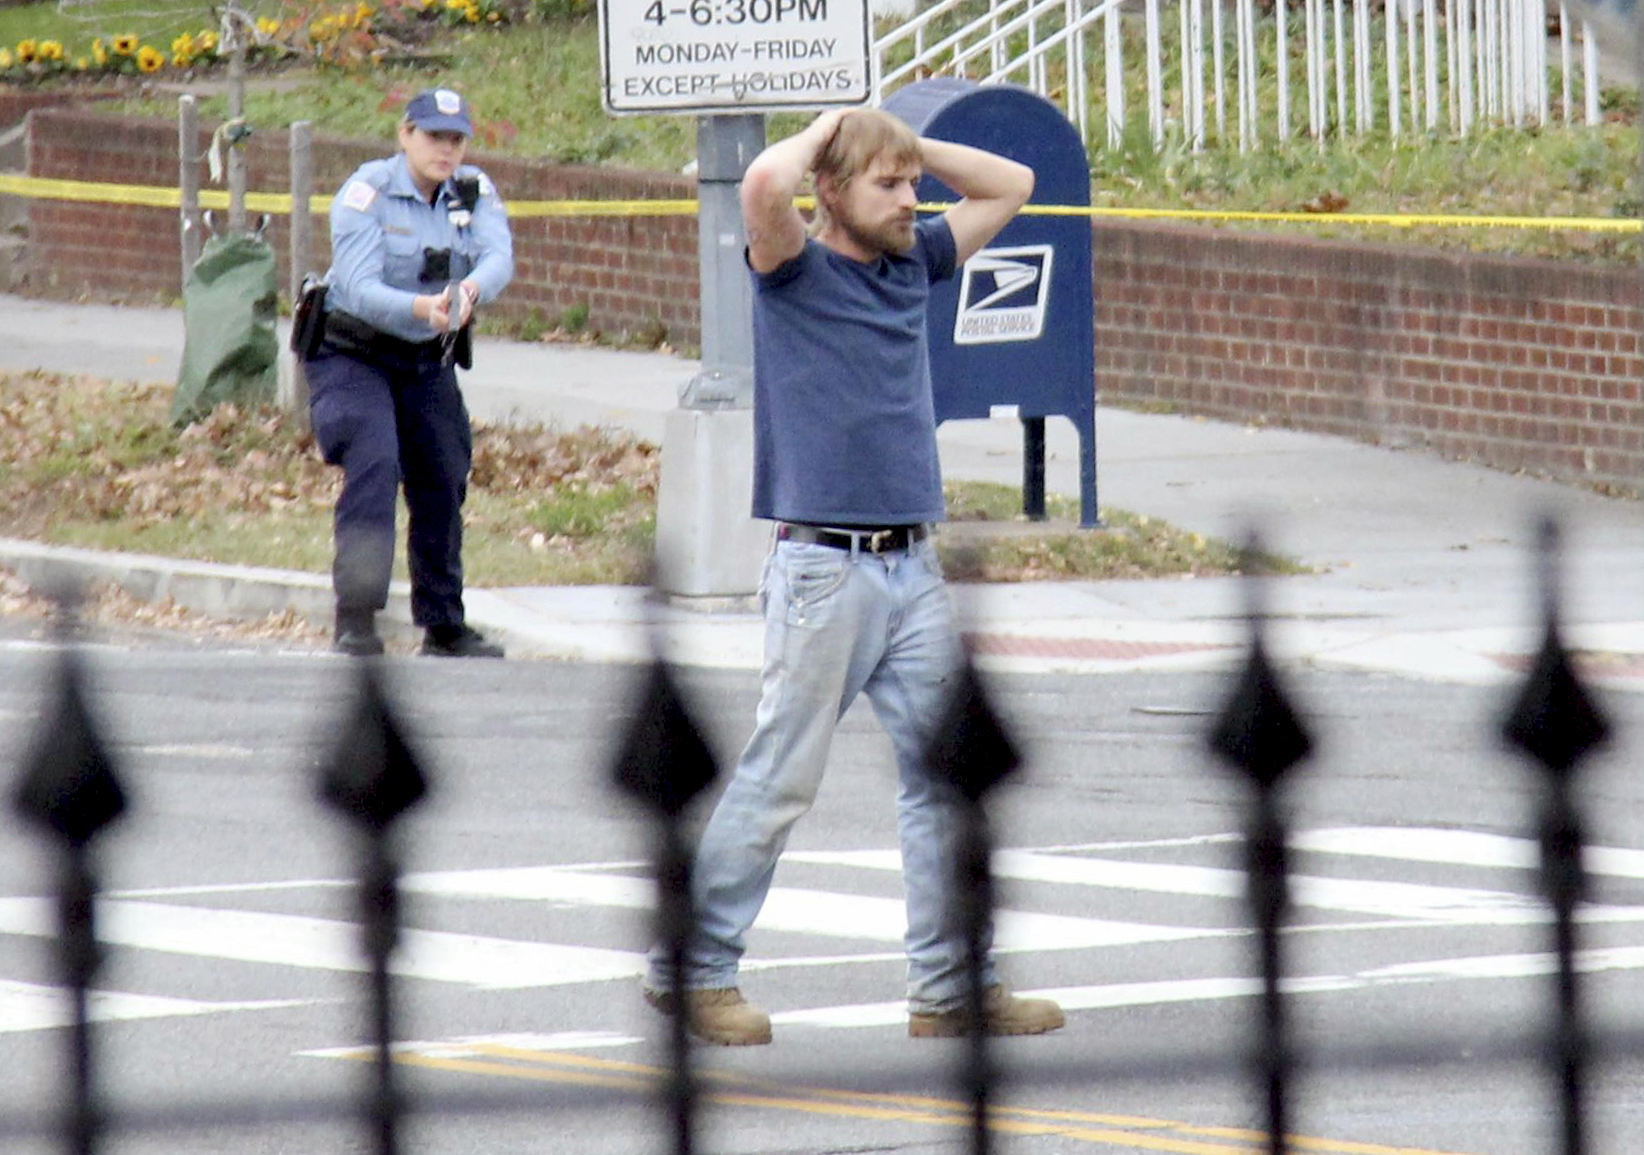 Edgar Maddison Welch, 28 of Salisbury, N.C., surrenders to police Dec. 4, 2016, in Washington D.C. after firing a gun while claiming to investigate a conspiracy theory about Hillary Clinton running a child sex ring. (Sathi Soma—AP)